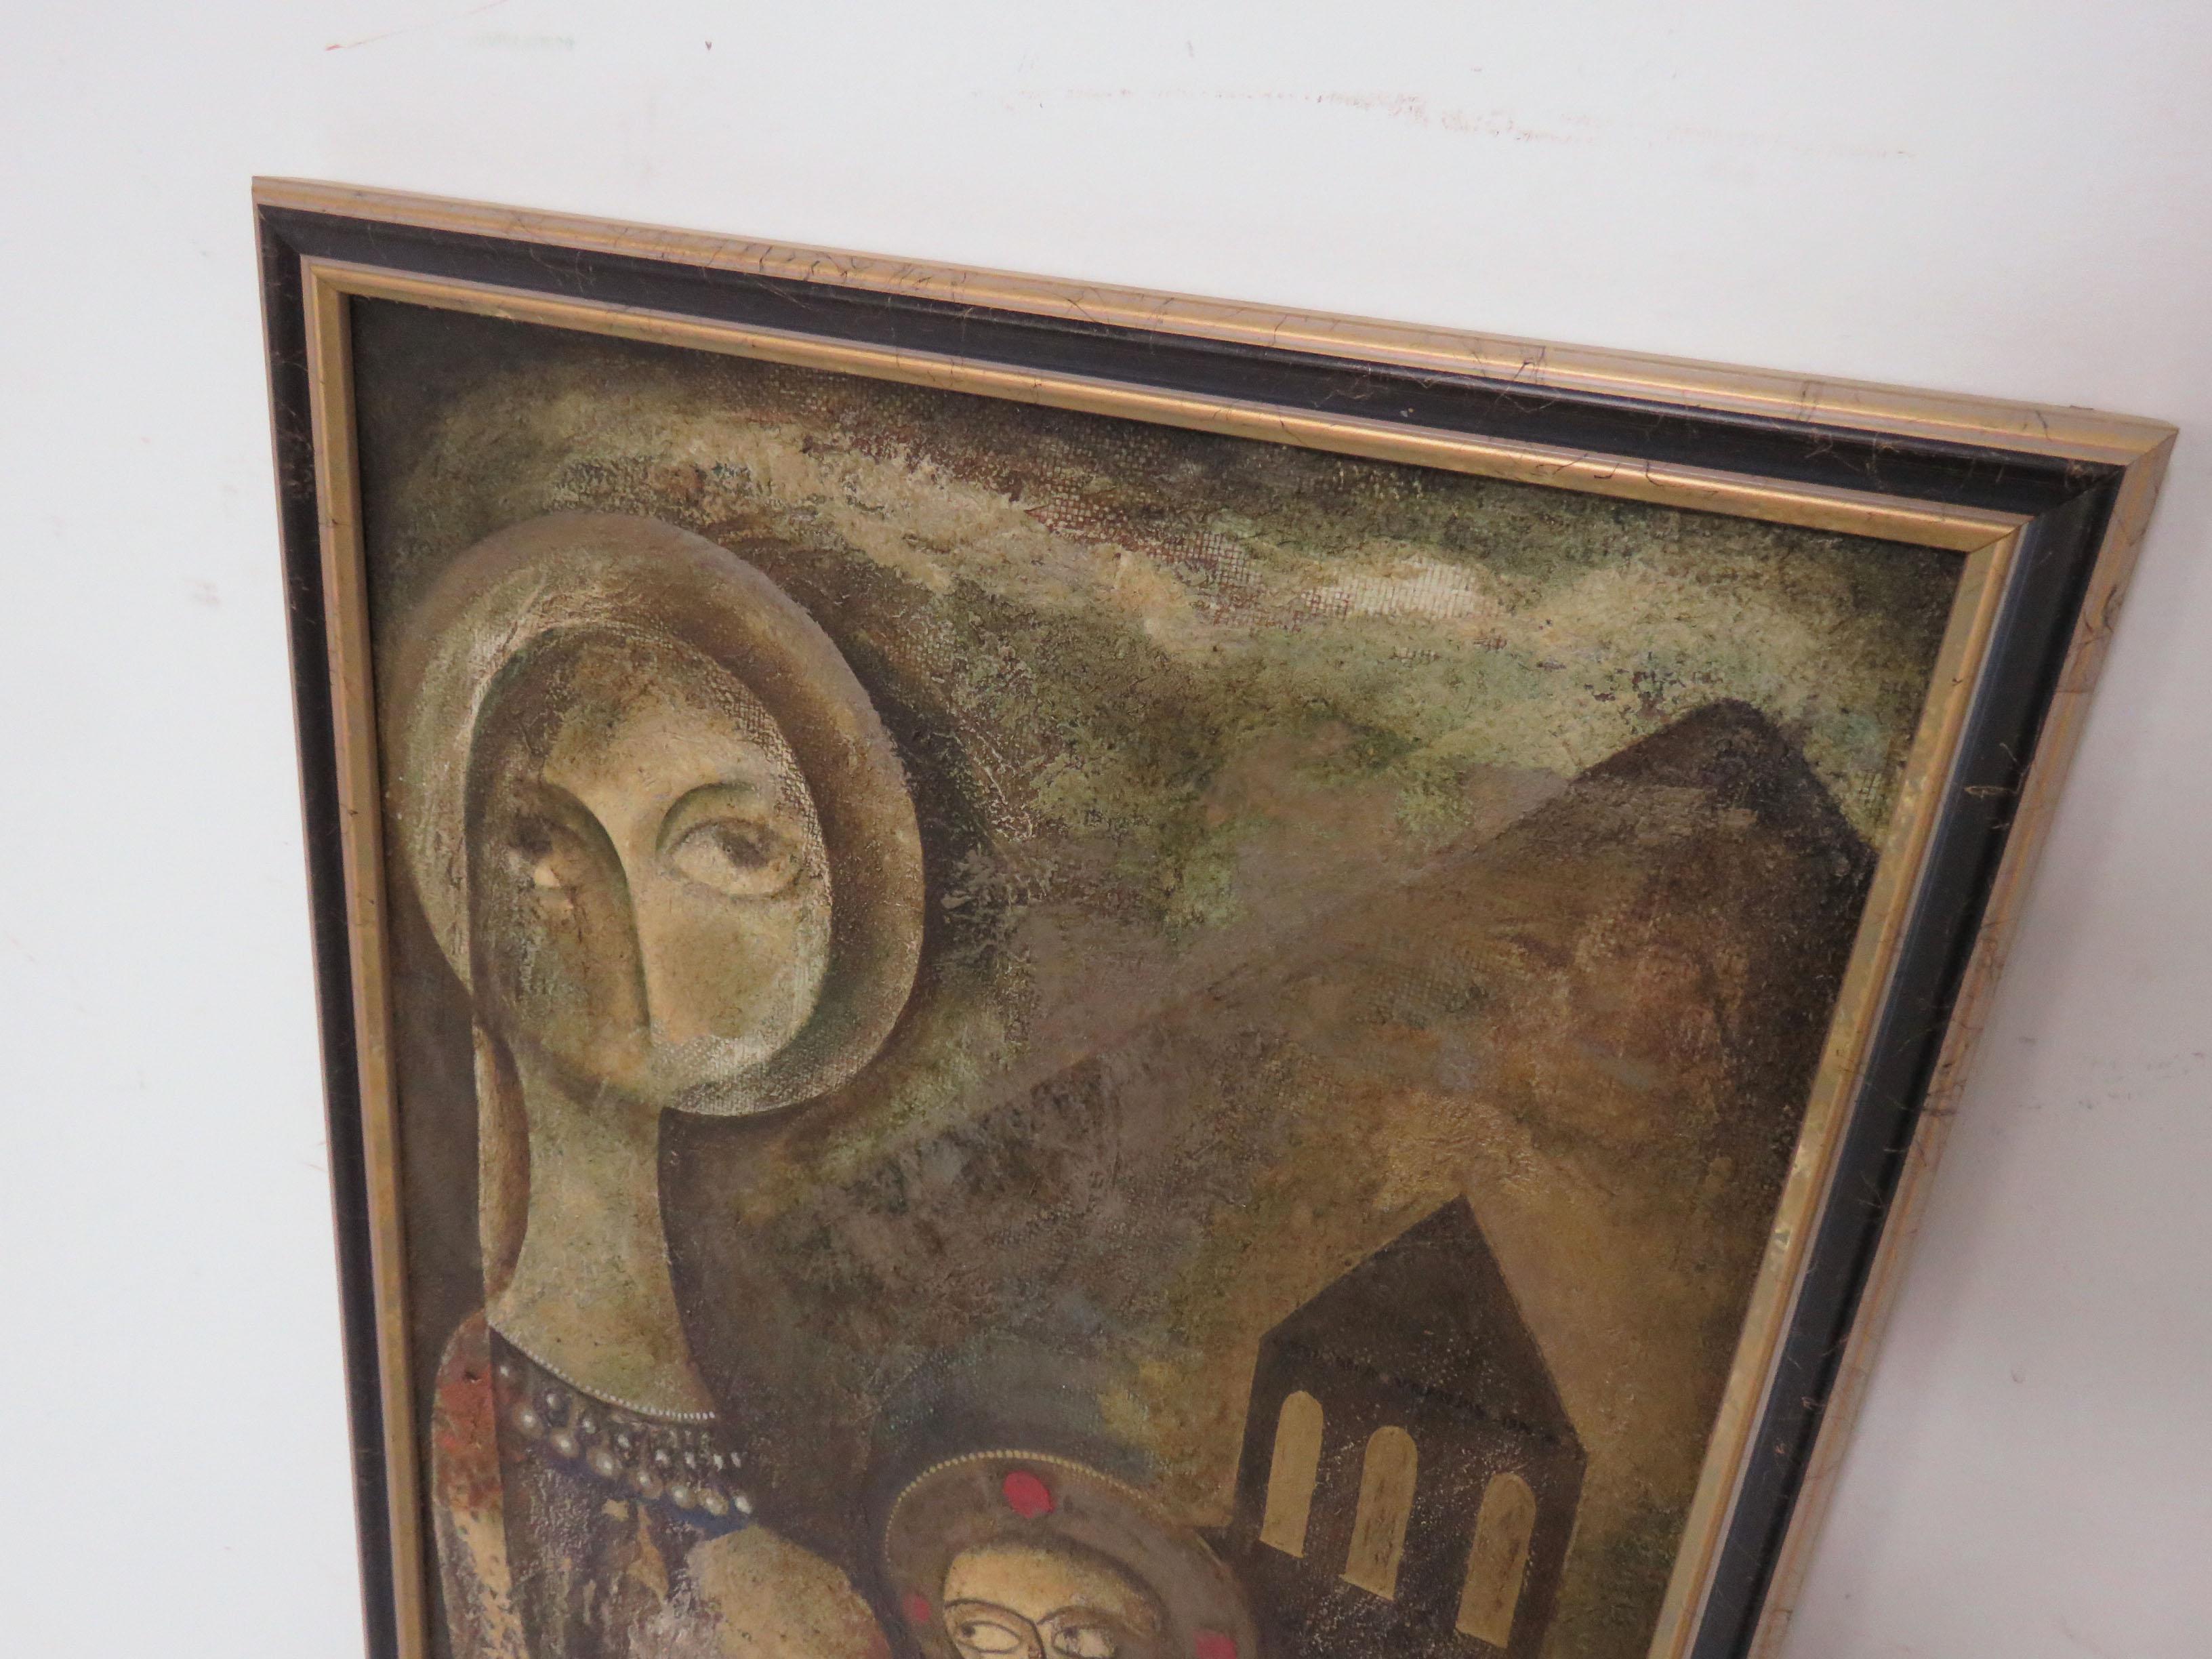 A modernist inspired fable painting by A. Mouradian. This piece, an oil on canvas board, is unsigned. We recently acquired a small grouping of Armenian figurative paintings by this unknown artist from the collection of Gordon Lankton, founder of the